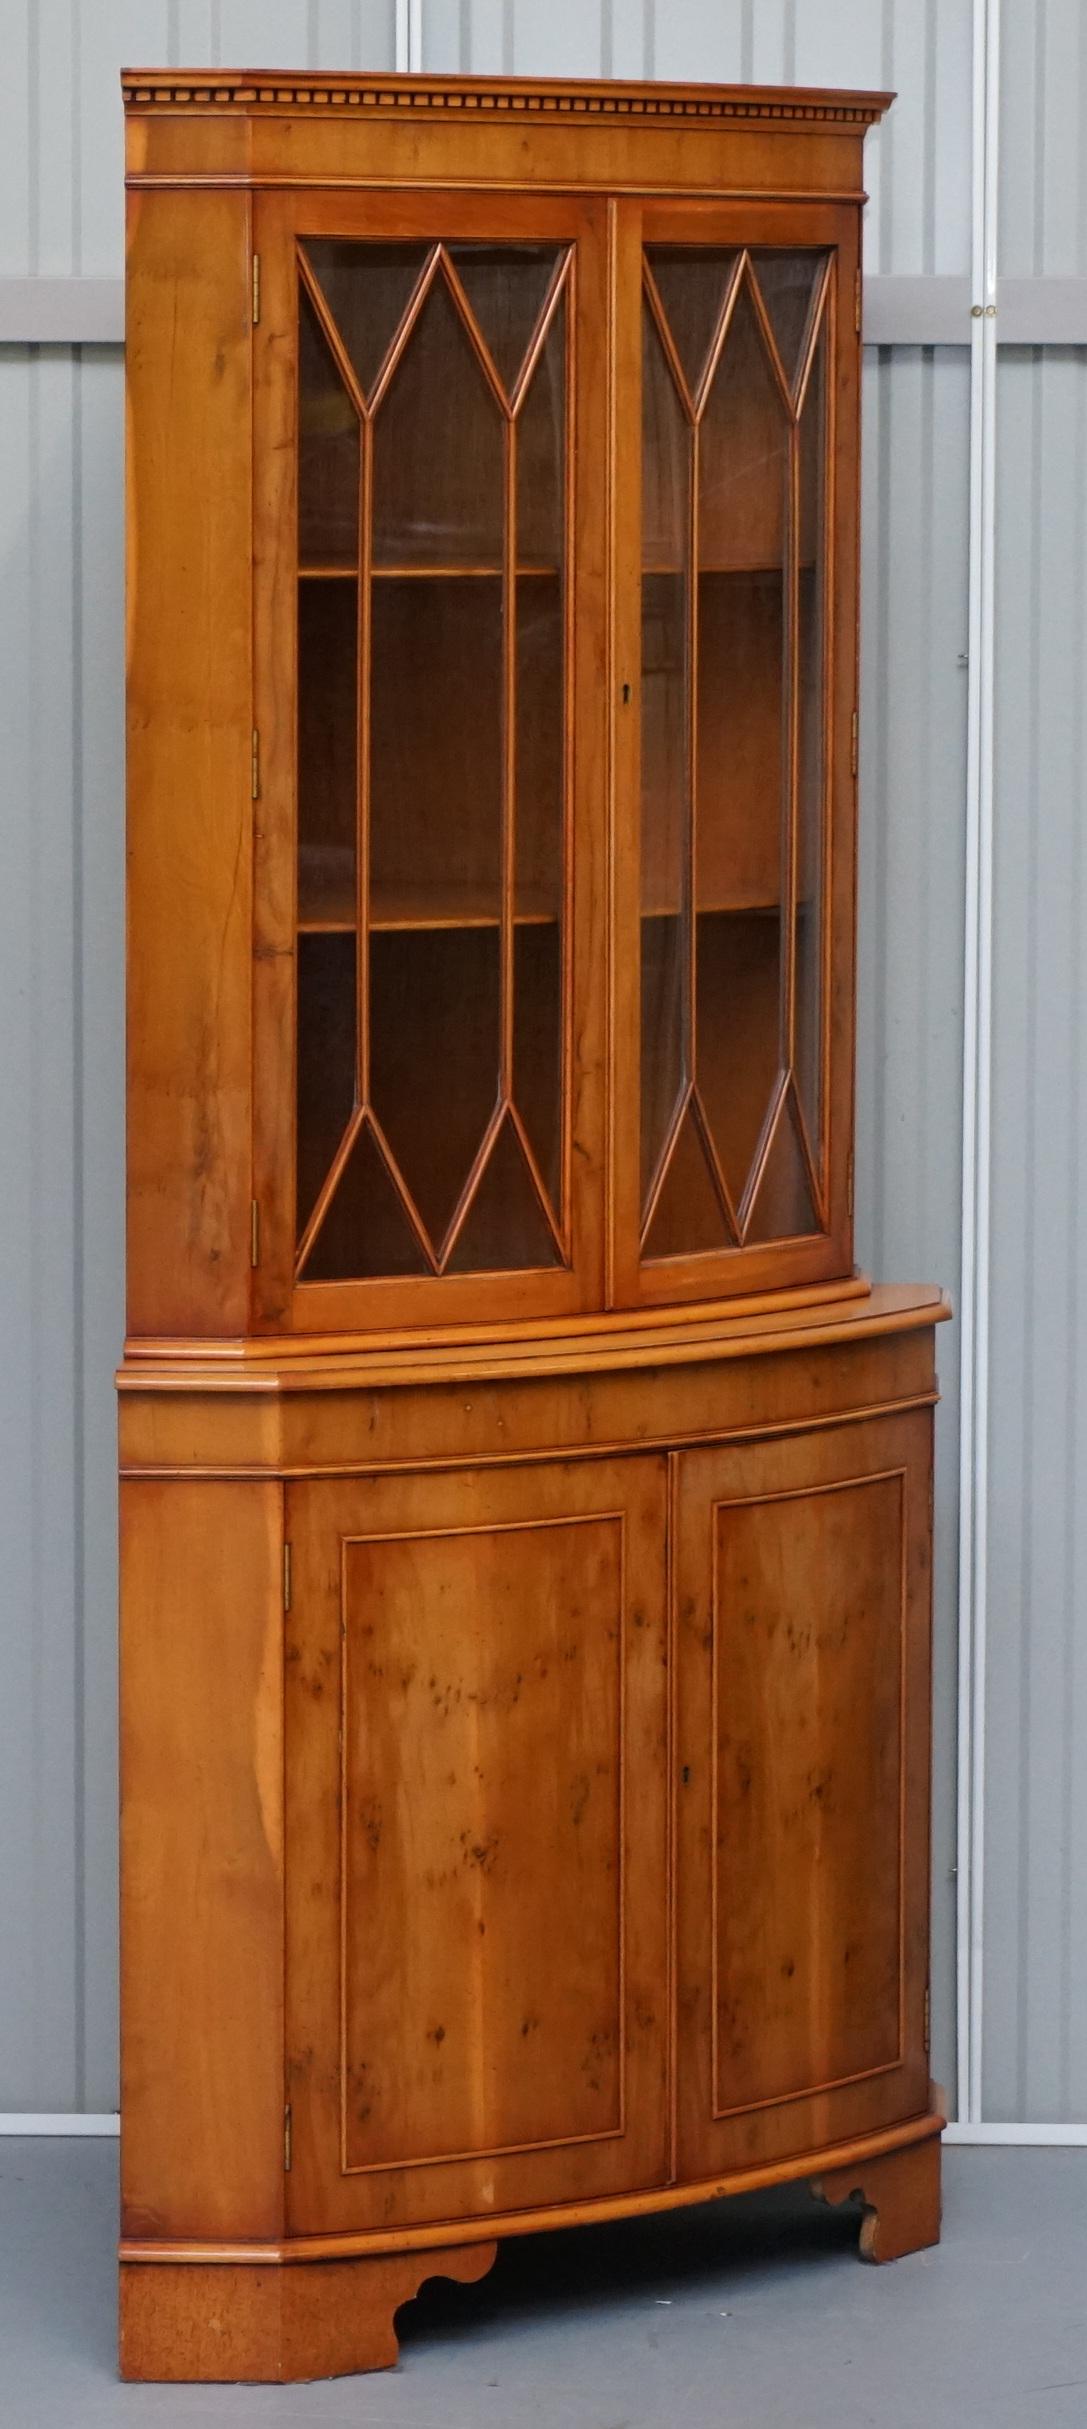 We are delighted to this very good looking Bradley furniture and well-made burr yew wood astral glazed corner cupboard

A good looking functional and decorative piece

Condition wise we have cleaned waxed and polished it, there will be age